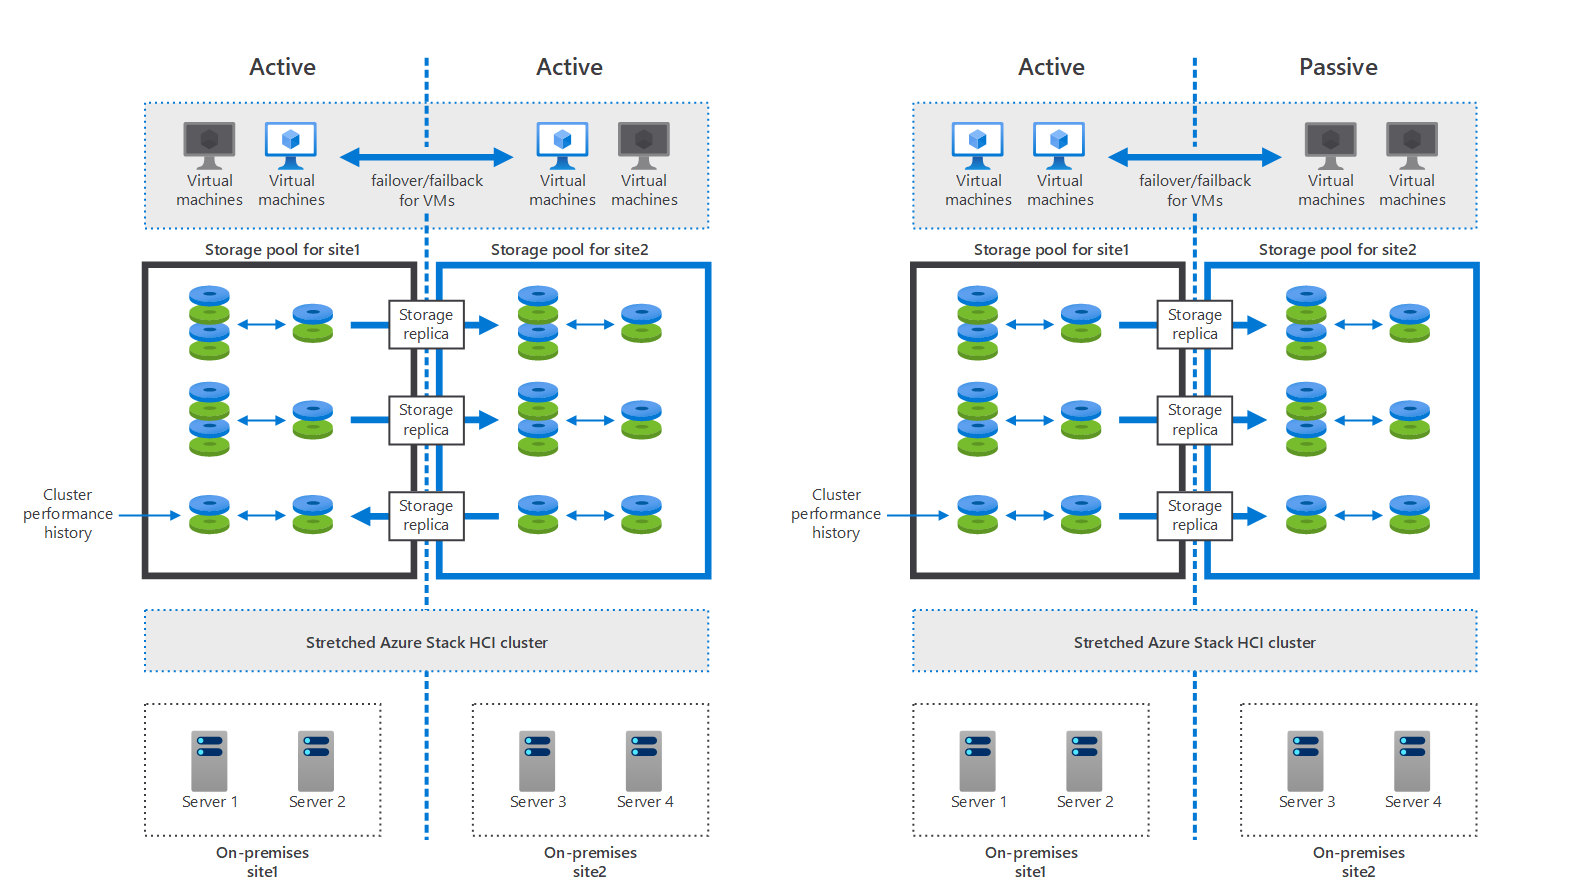 Diagram illustrating an active-active and an active-passive Azure Stack HCI stretched cluster, with storage volumes and cluster performance history replicating via Storage Replica. In the active-active mode, there is replication traffic in each direction, with both sites hosting Azure Stack HCI VMs. In the active-passive mode, replication is unidirectional, with the active site hosting Azure Stack HCI VMs.